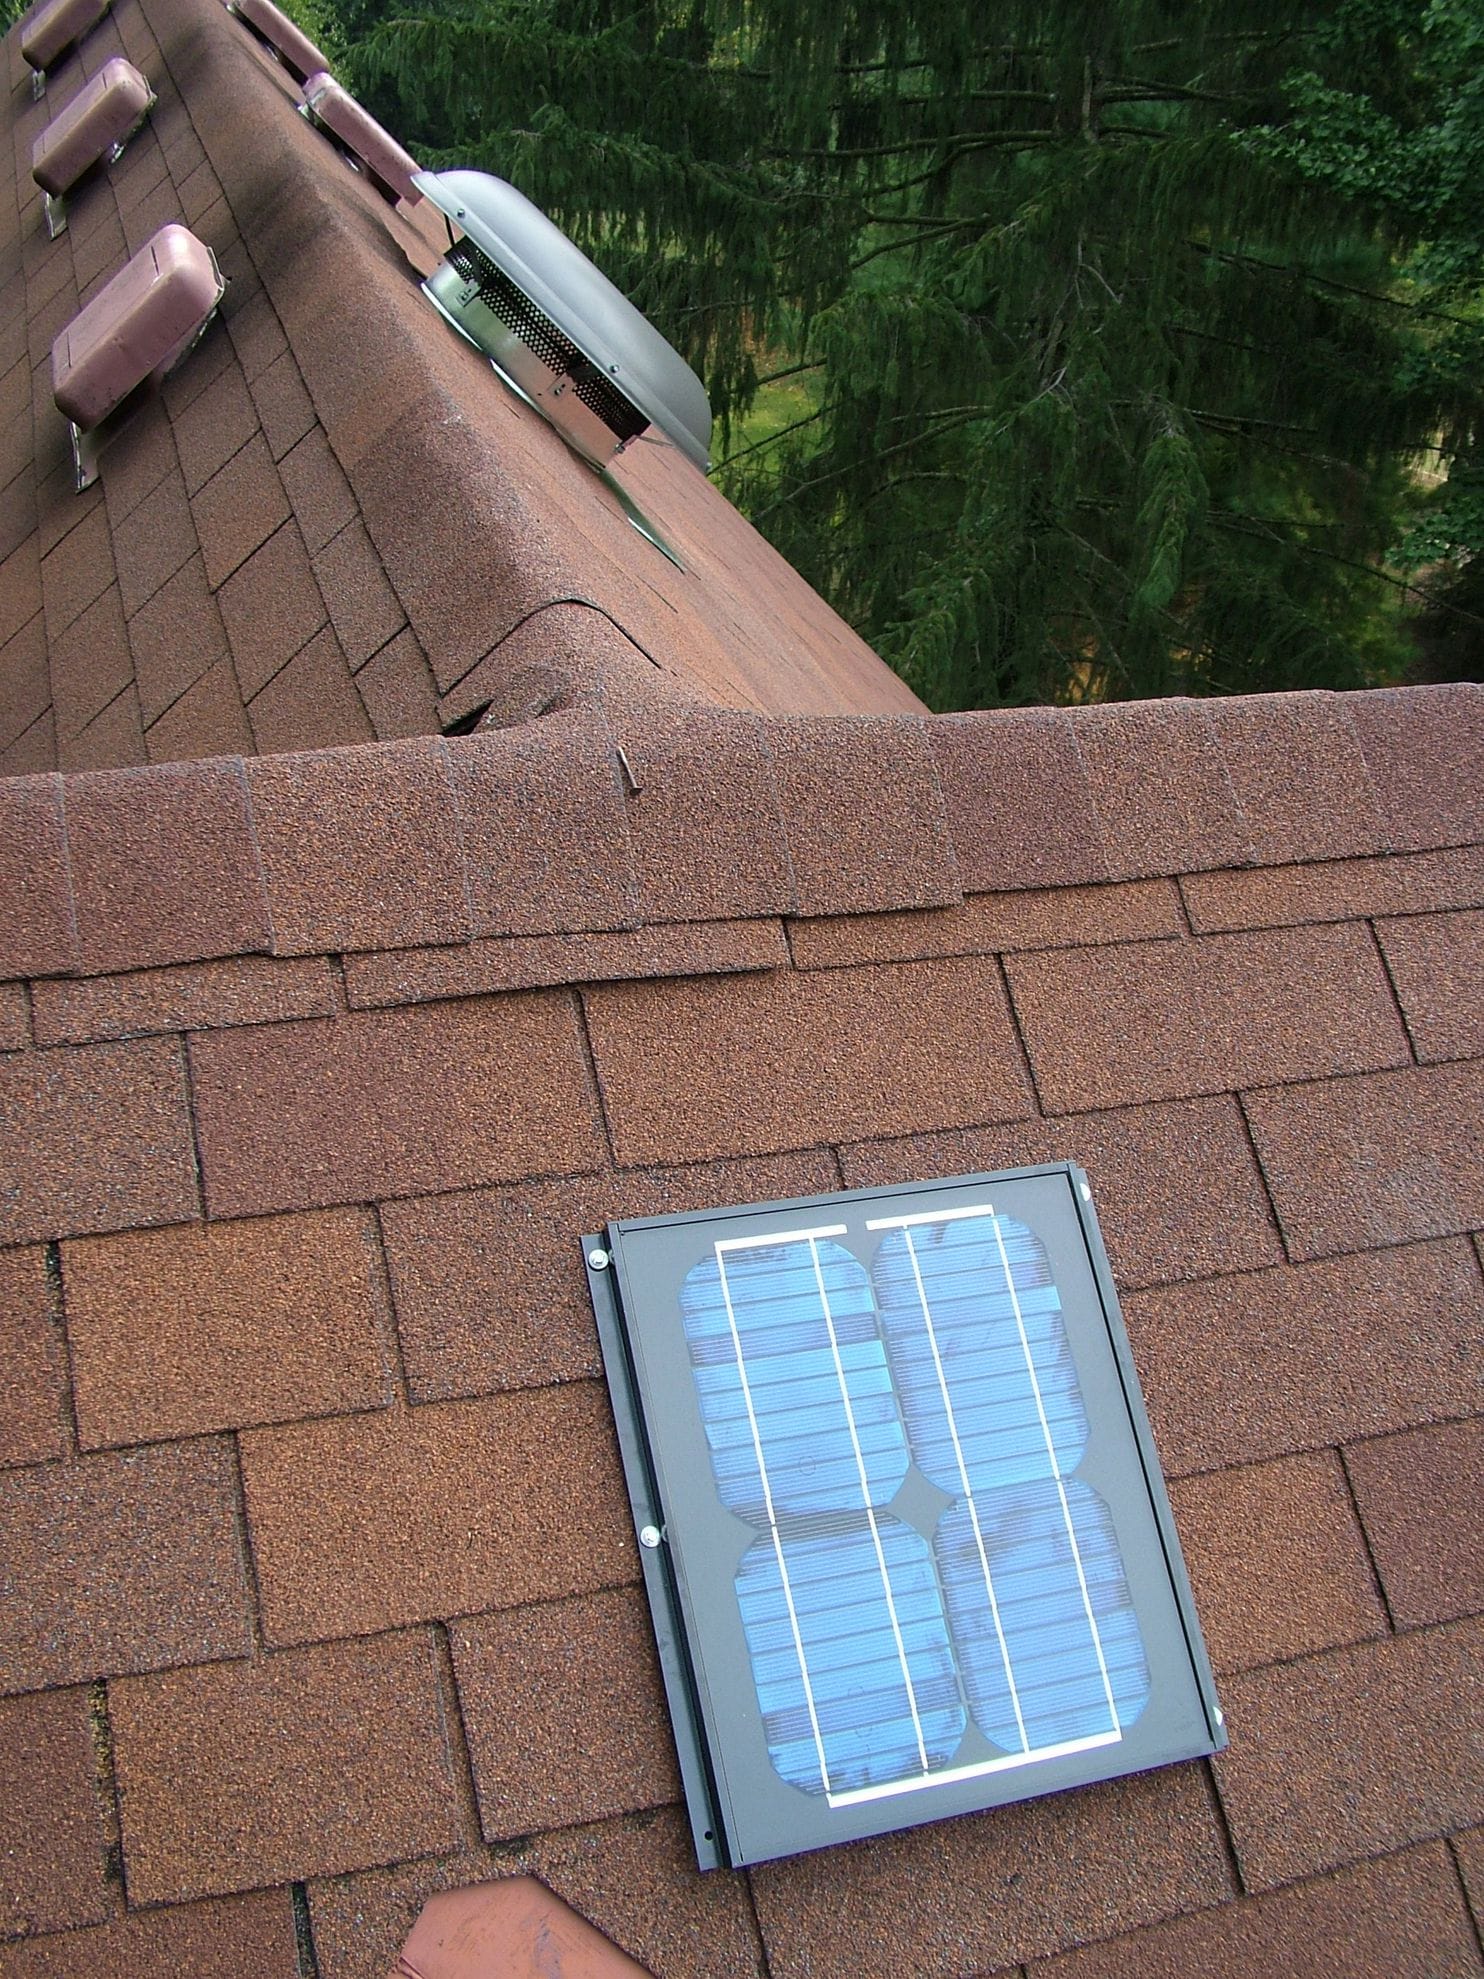 Is a solar attic fan worth the cost?